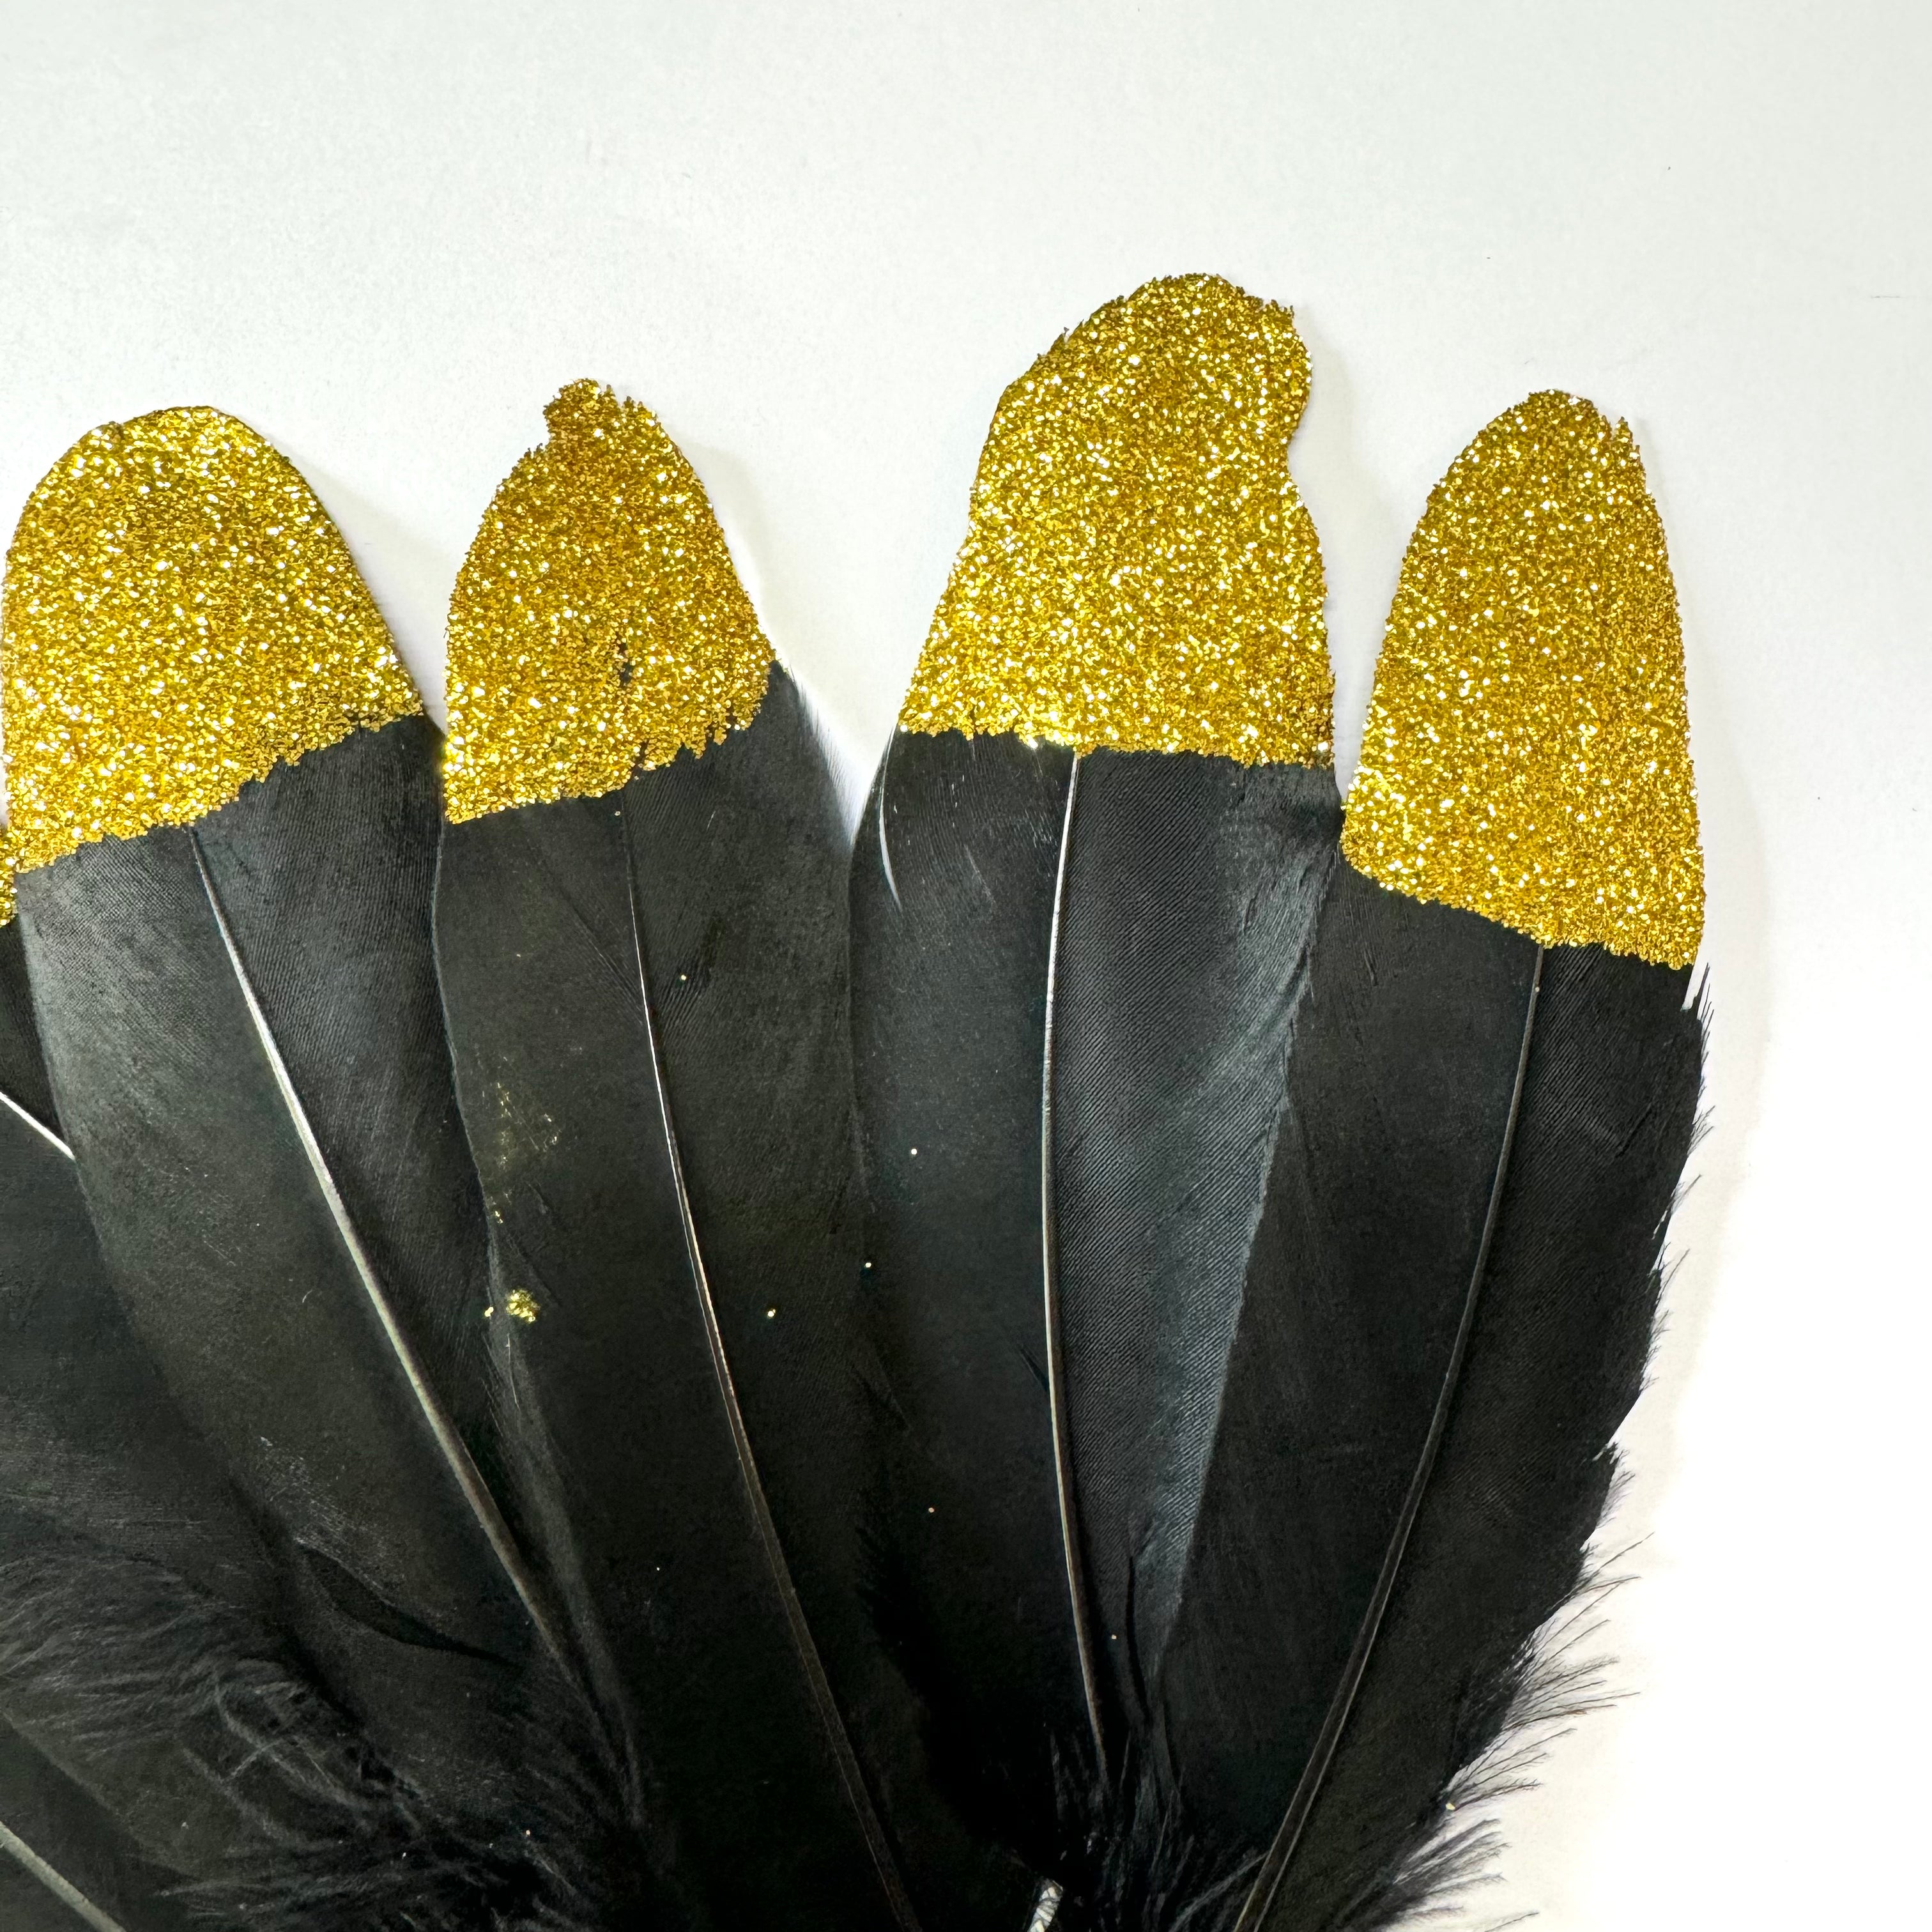 Goose Pointer Feather Gold Glitter Tipped x 10 pcs - Black - Style 25